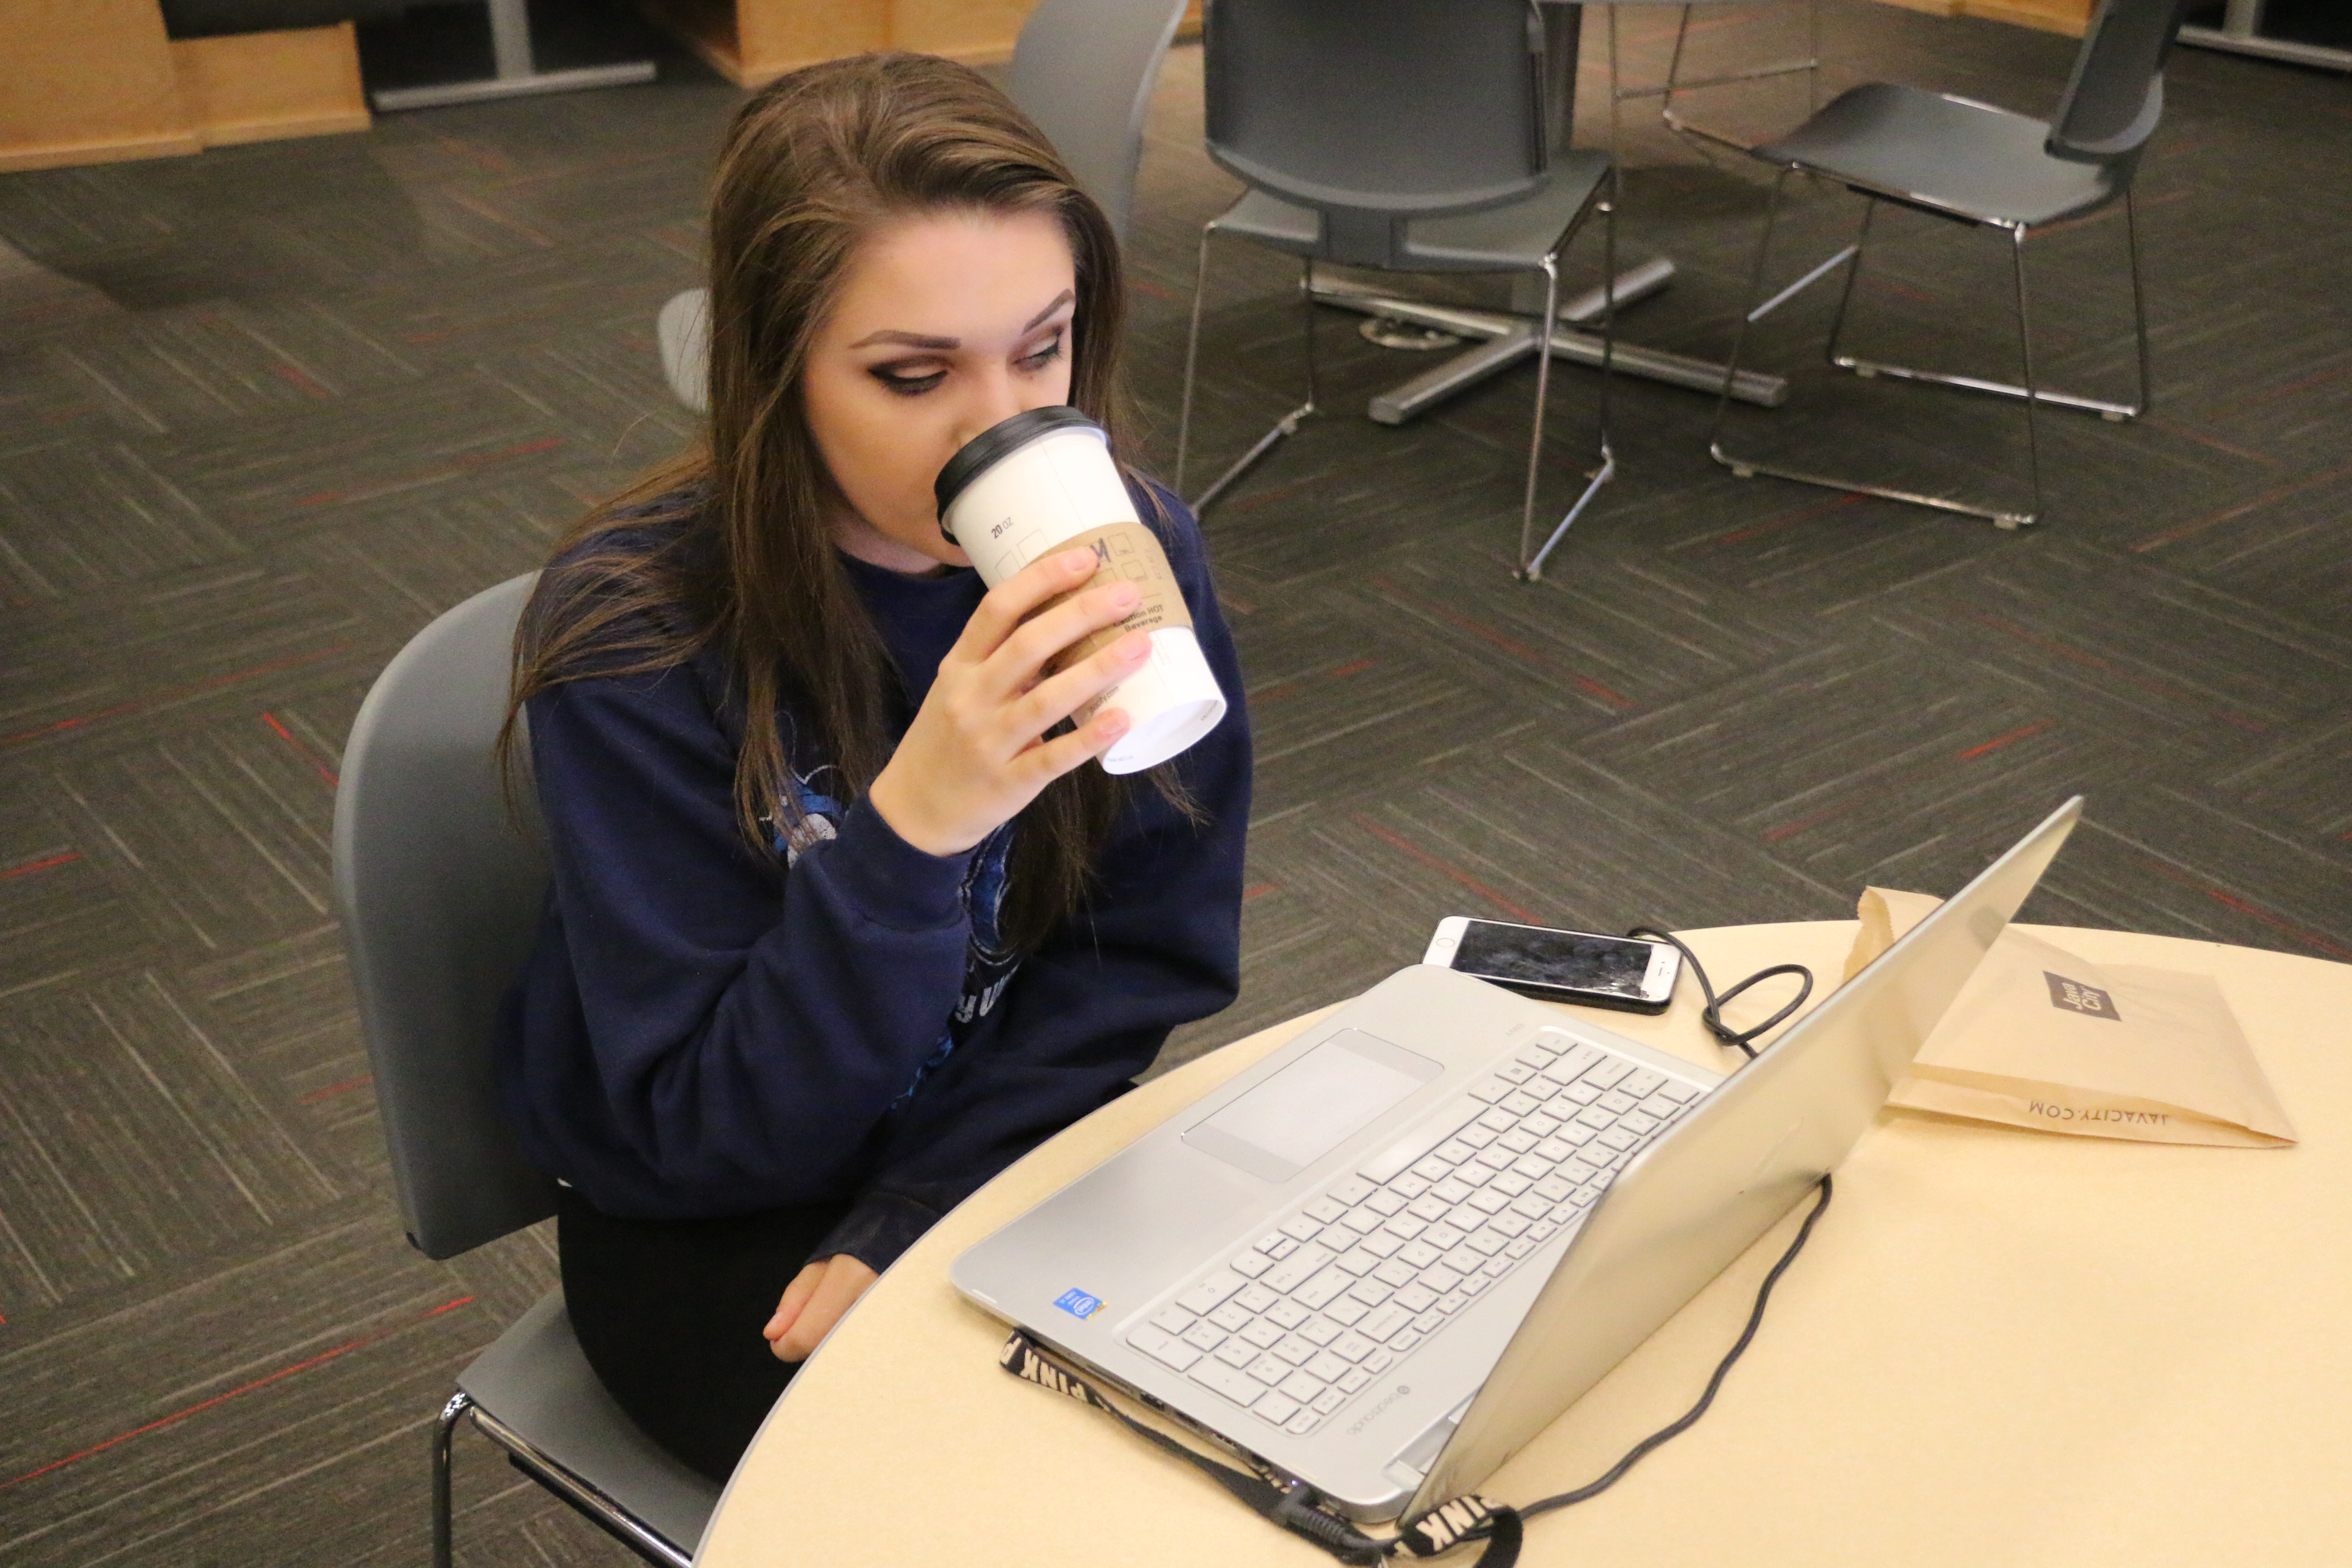 Caffeine intake for students too high, healthier options available